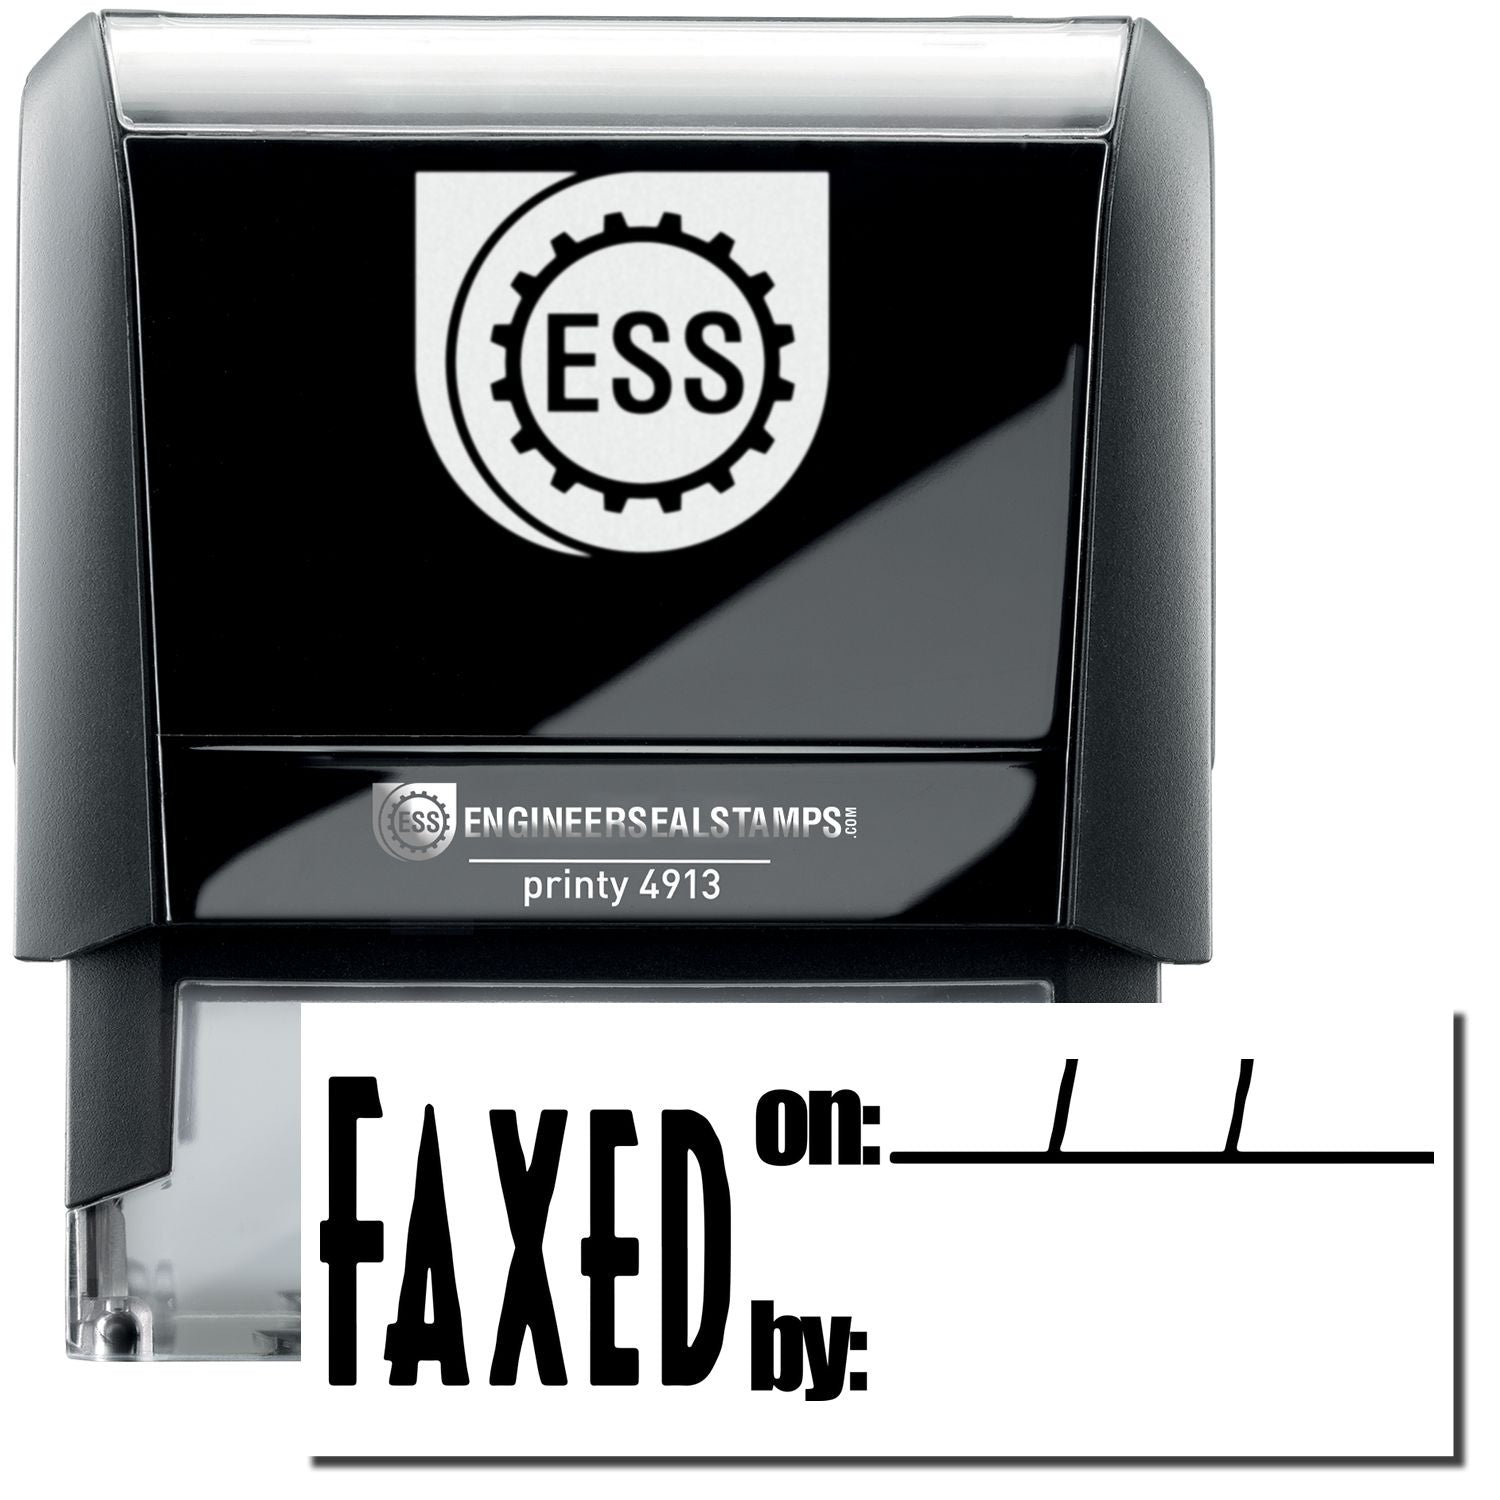 A self-inking stamp with a stamped image showing how the text "FAXED on: ___/___/___ by:" is displayed by it after stamping showing a space to mention the date and who is sending the fax.